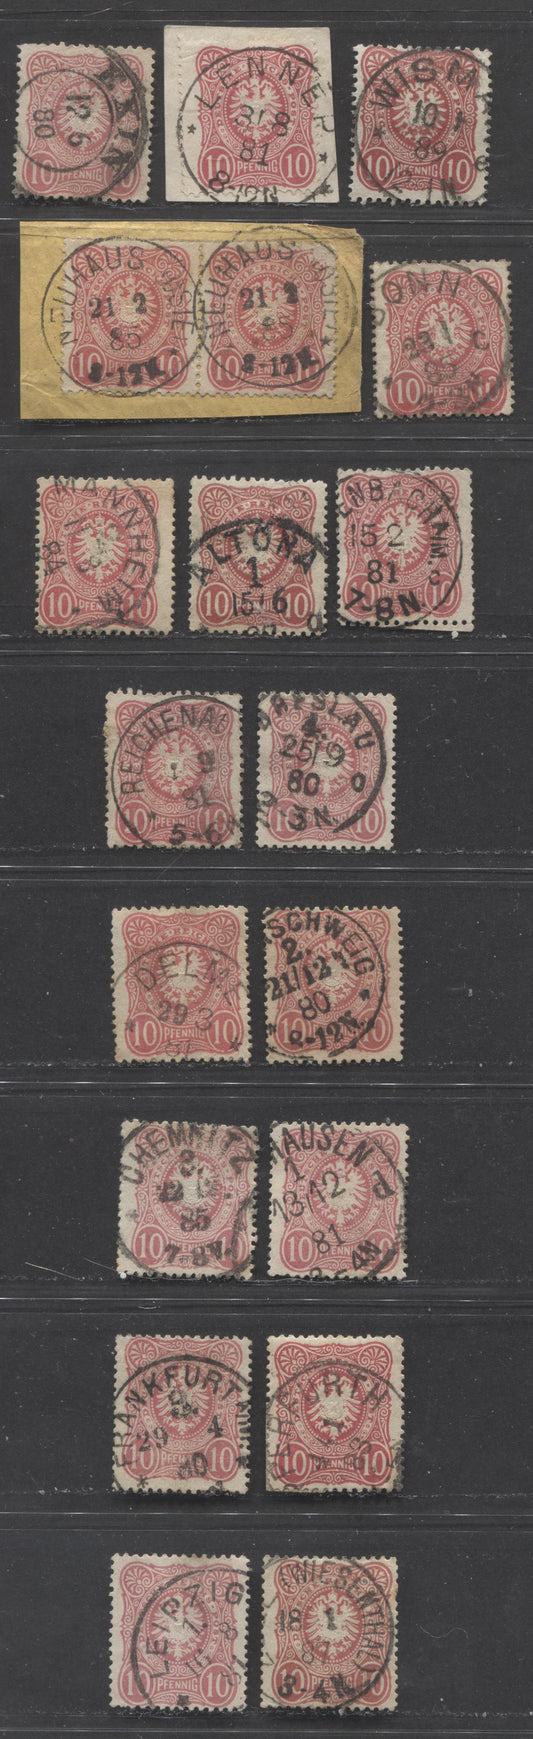 Lot 424 Germany SC#39  1880-1883 Numeral & Eagle Pfenning Issue, All With SON Town Cancels, Including Some Polish Towns, 19 Fine & VF Used Singles, Click on Listing to See ALL Pictures, Estimated Value $20